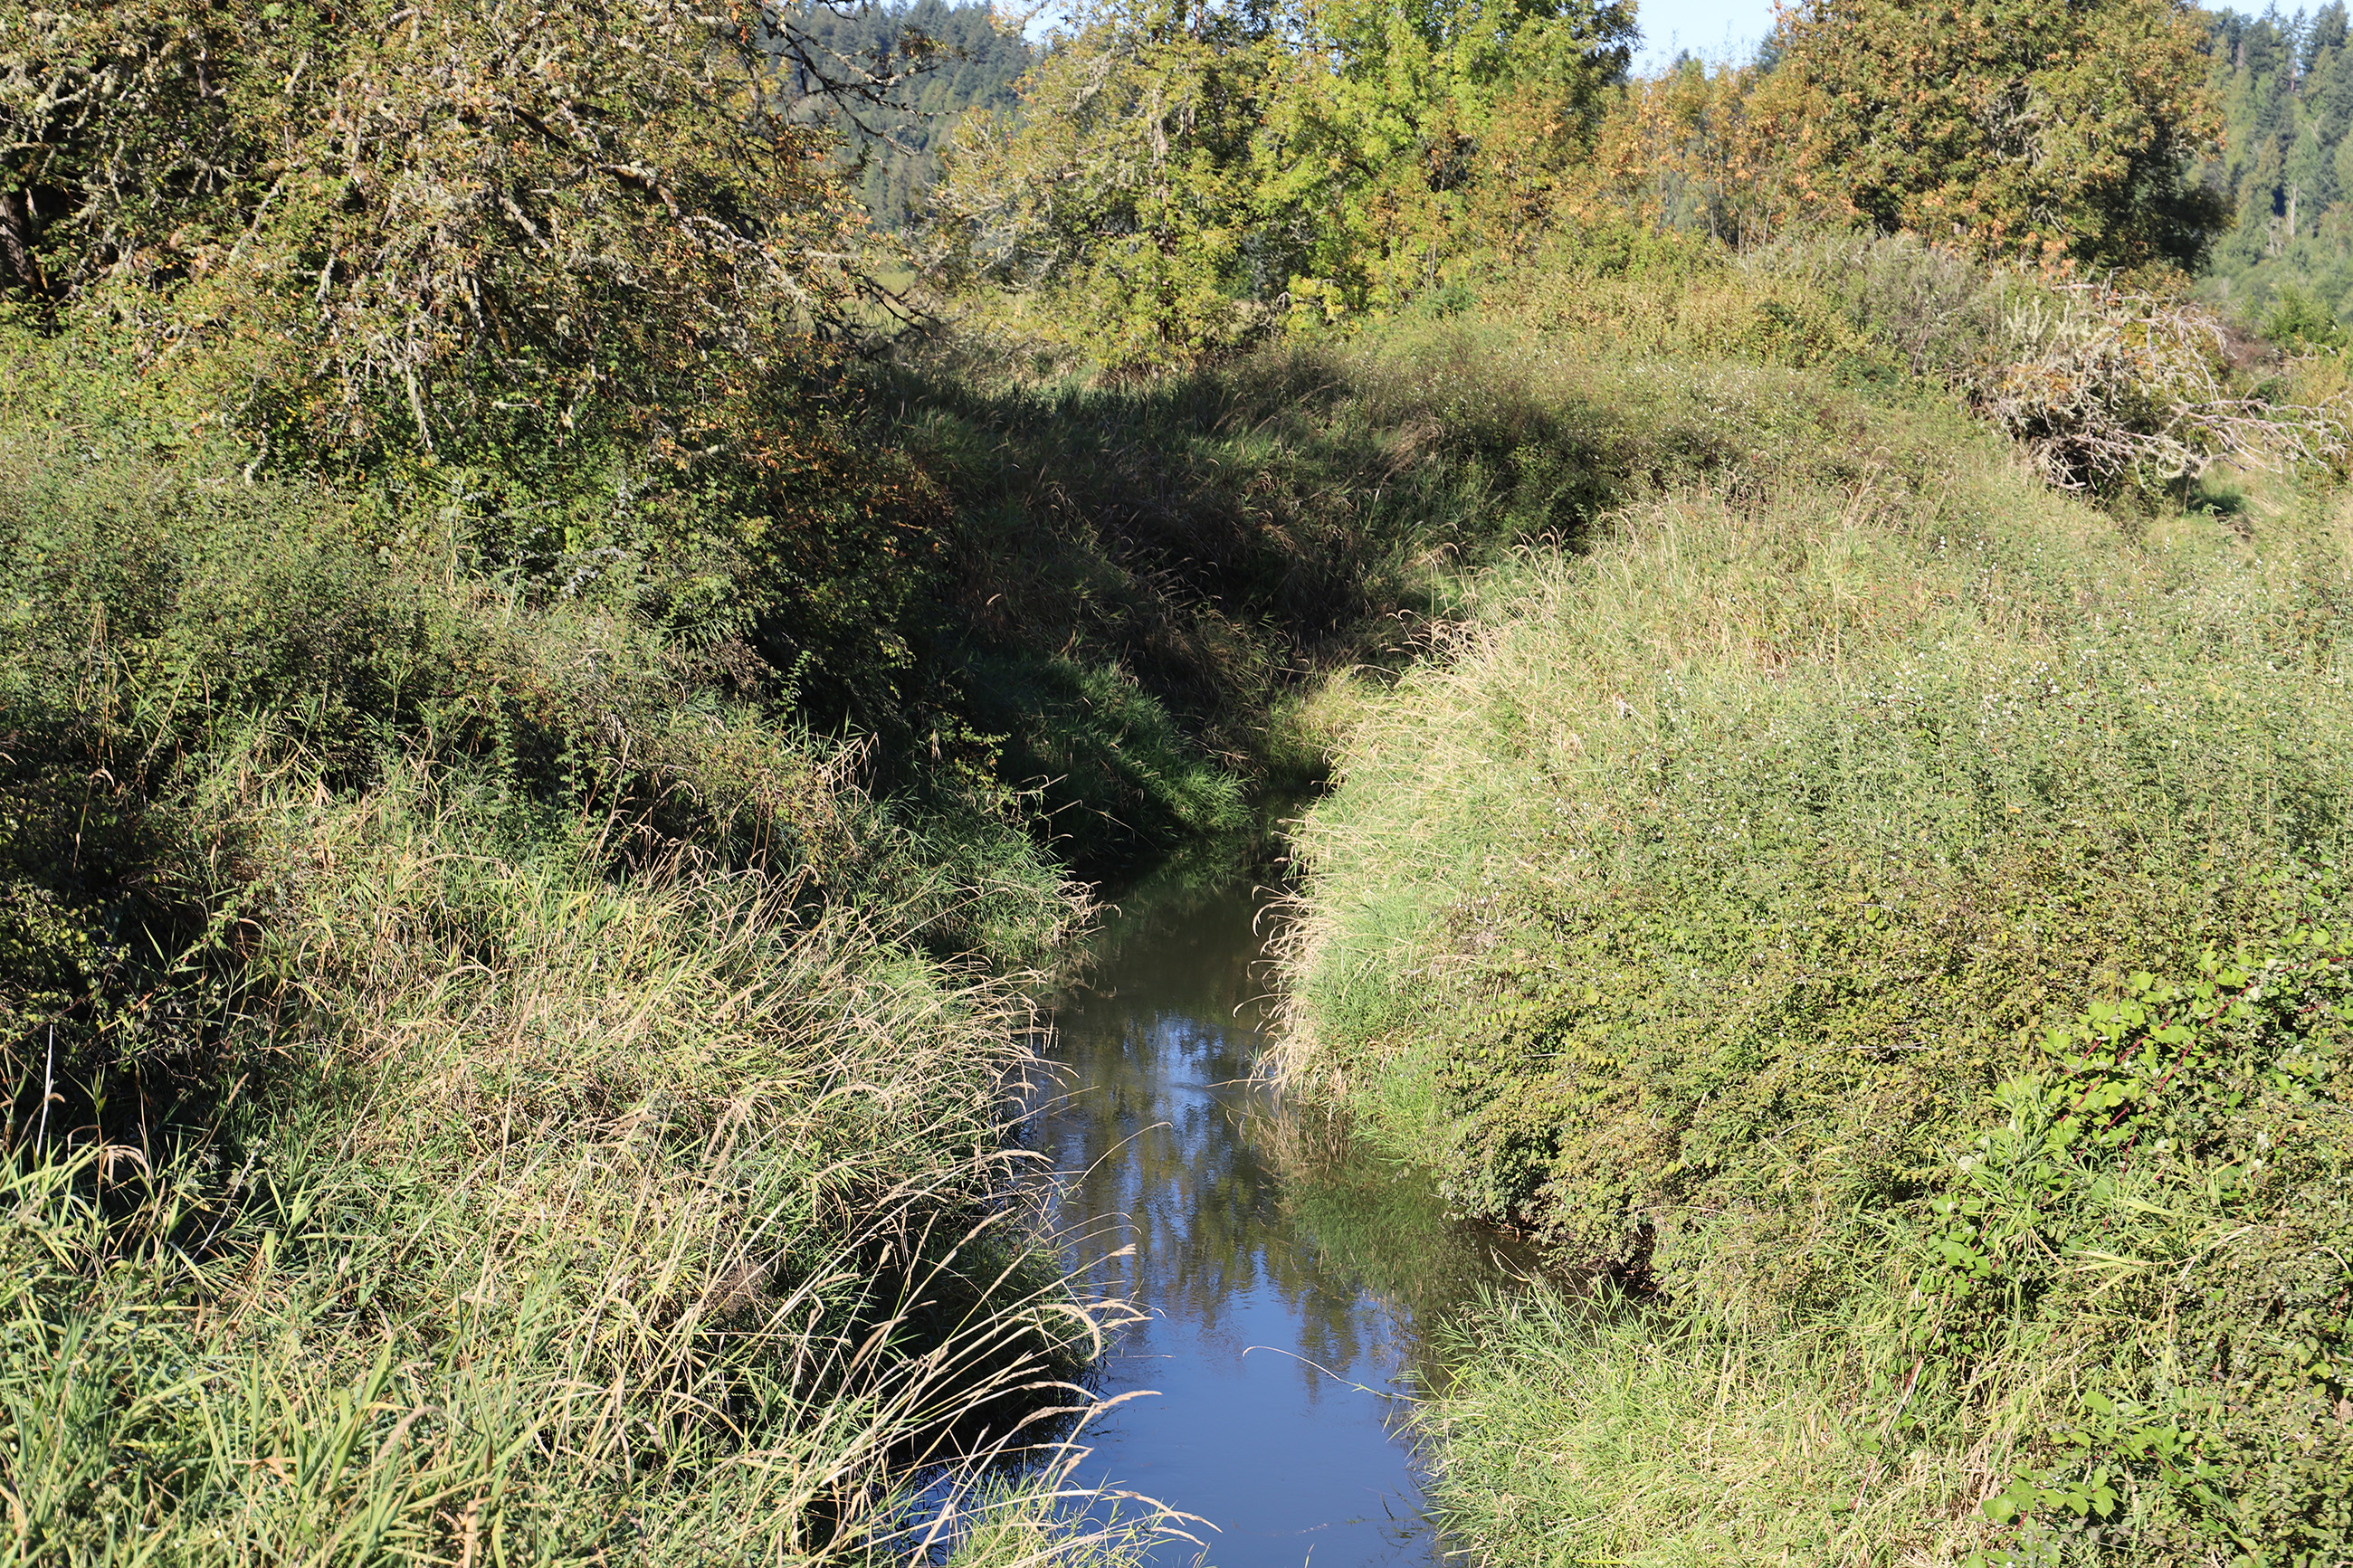 Narrow stream surrounded by grass